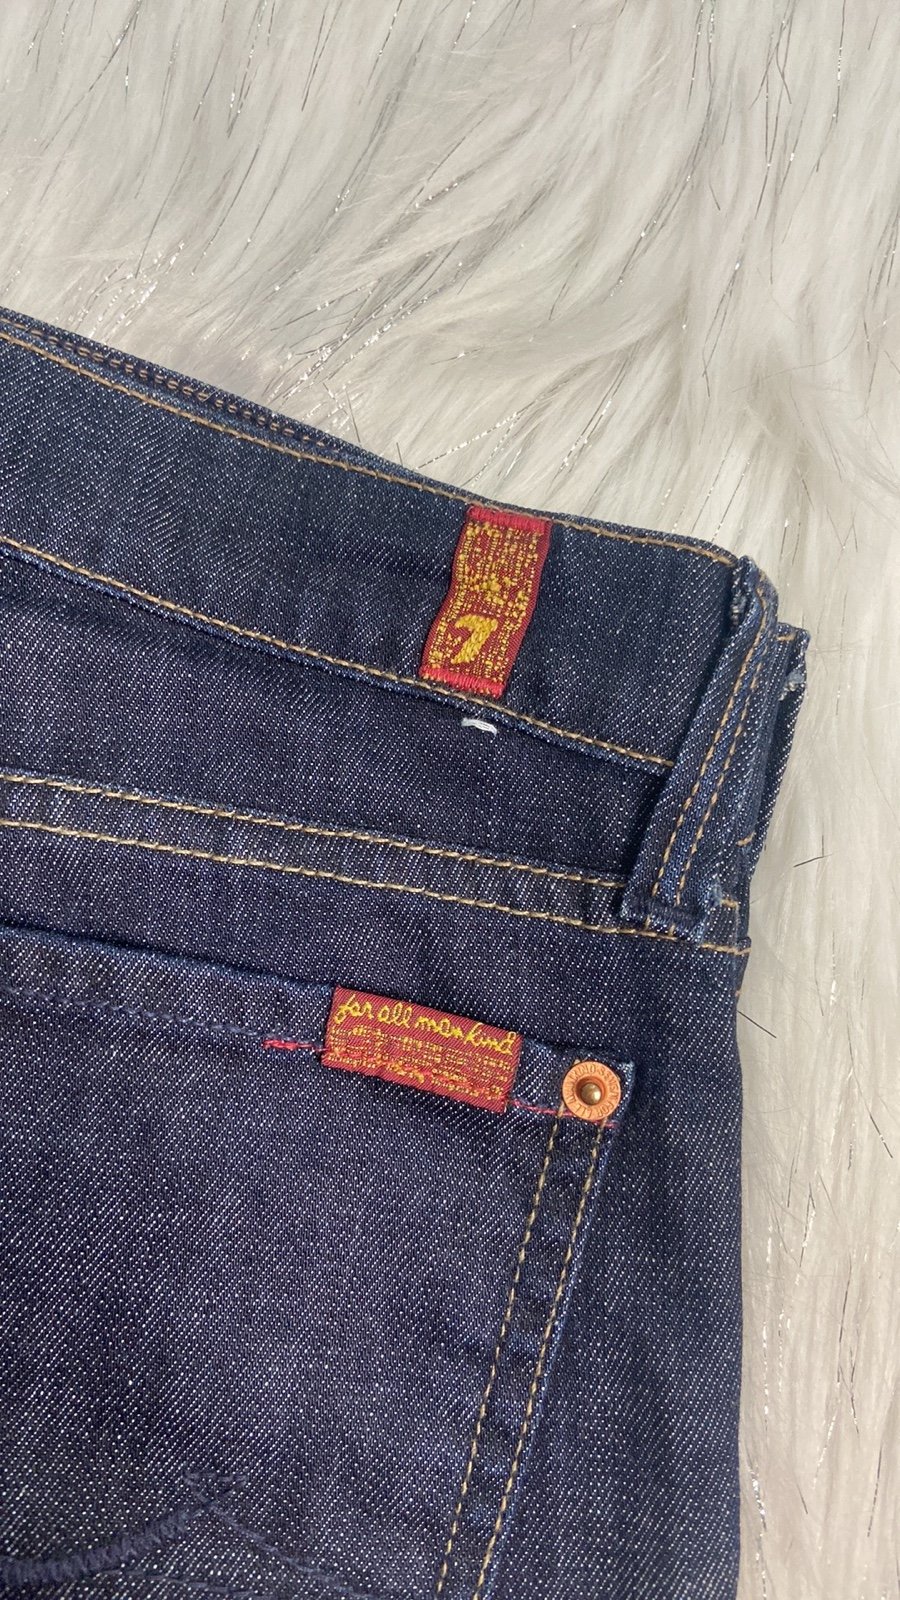 Classic 7 For All Mankind Women´s Straight Leg Jeans size 28 gbxQBcQx4 for sale